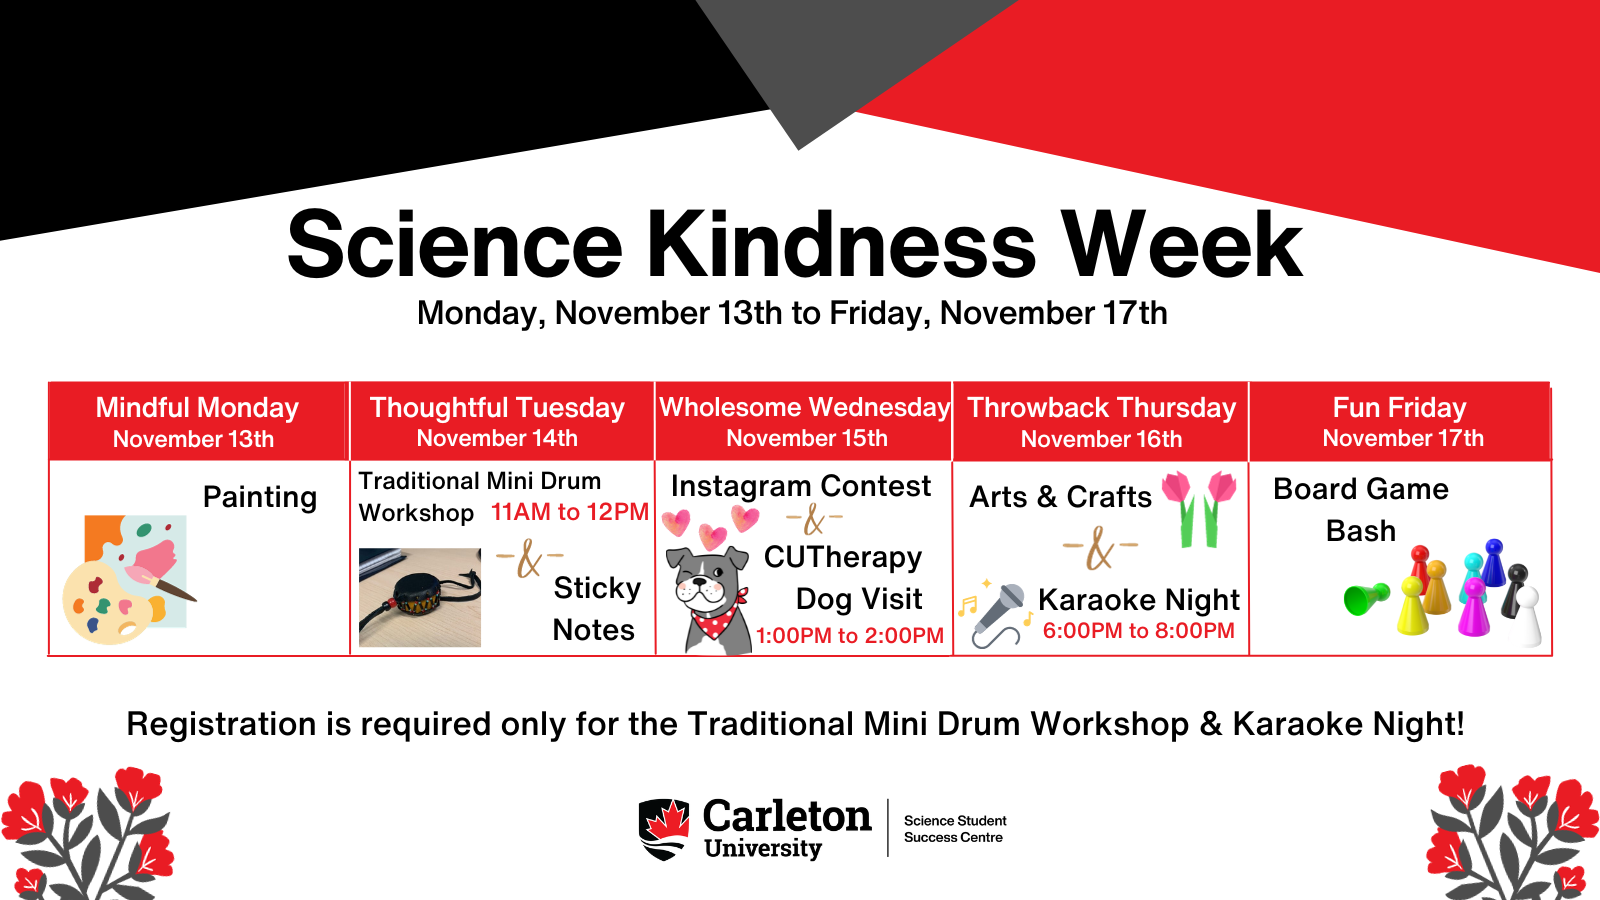 Poster with text. Text reads: Science Kindness Week - Monday, November 13th to Friday, November 17th. Mindful Monday, November 13th - Painting. Thoughtful Tuesday, November 14th - Traditional Mini Drum Workshop, 11AM to 12PM AND Sticky Notes. Wholesome Wednesday, November 15th, Instagram Context AND CUTherapy Dog Visit, 1:00pm to 2:00pm. Throwback Thursday. Fun Friday, Board Game Bash. Registration is required only for the Traditional Mini Drum Workshop & Karaoke Night! Carleton University | Science Student Success Centre.